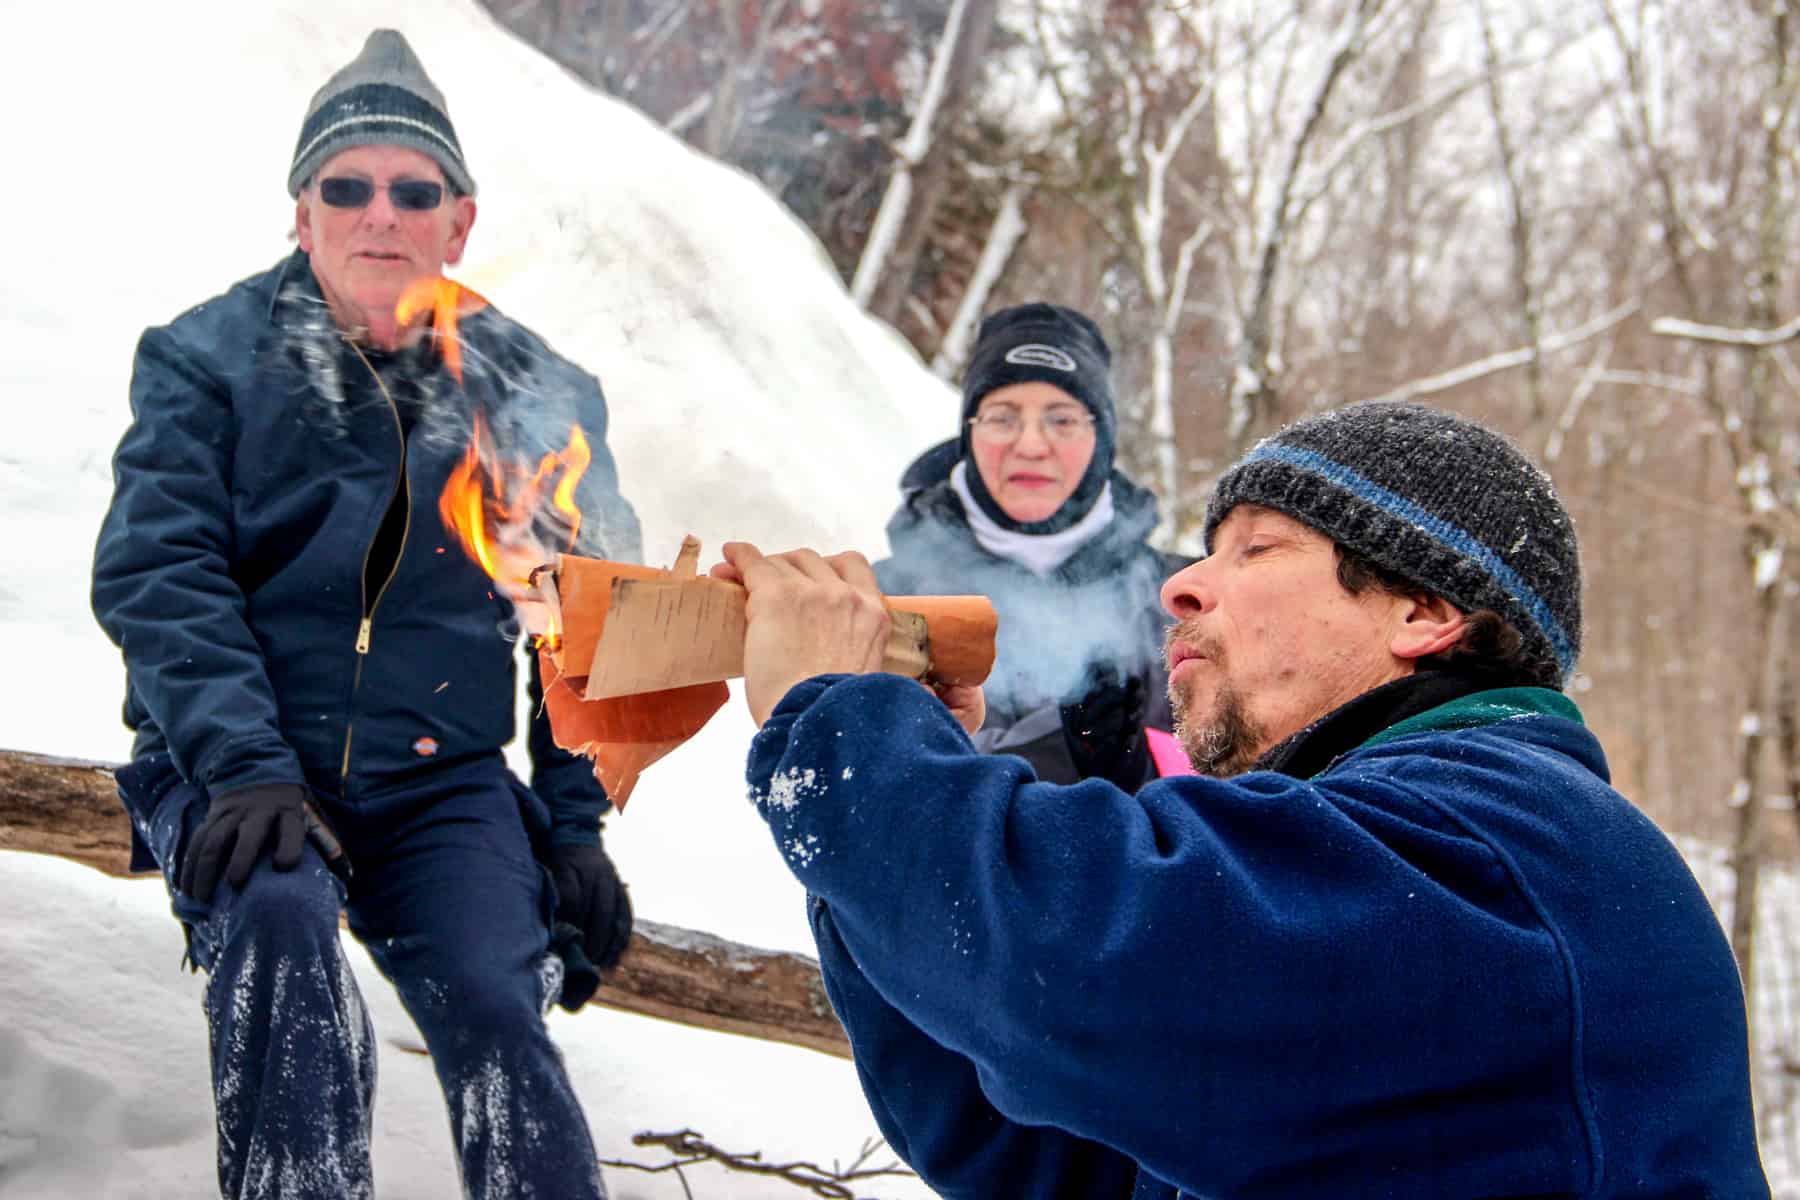 Two people look on as a man blows into a roll of paper to demonstrate how to start a fire in the snow.